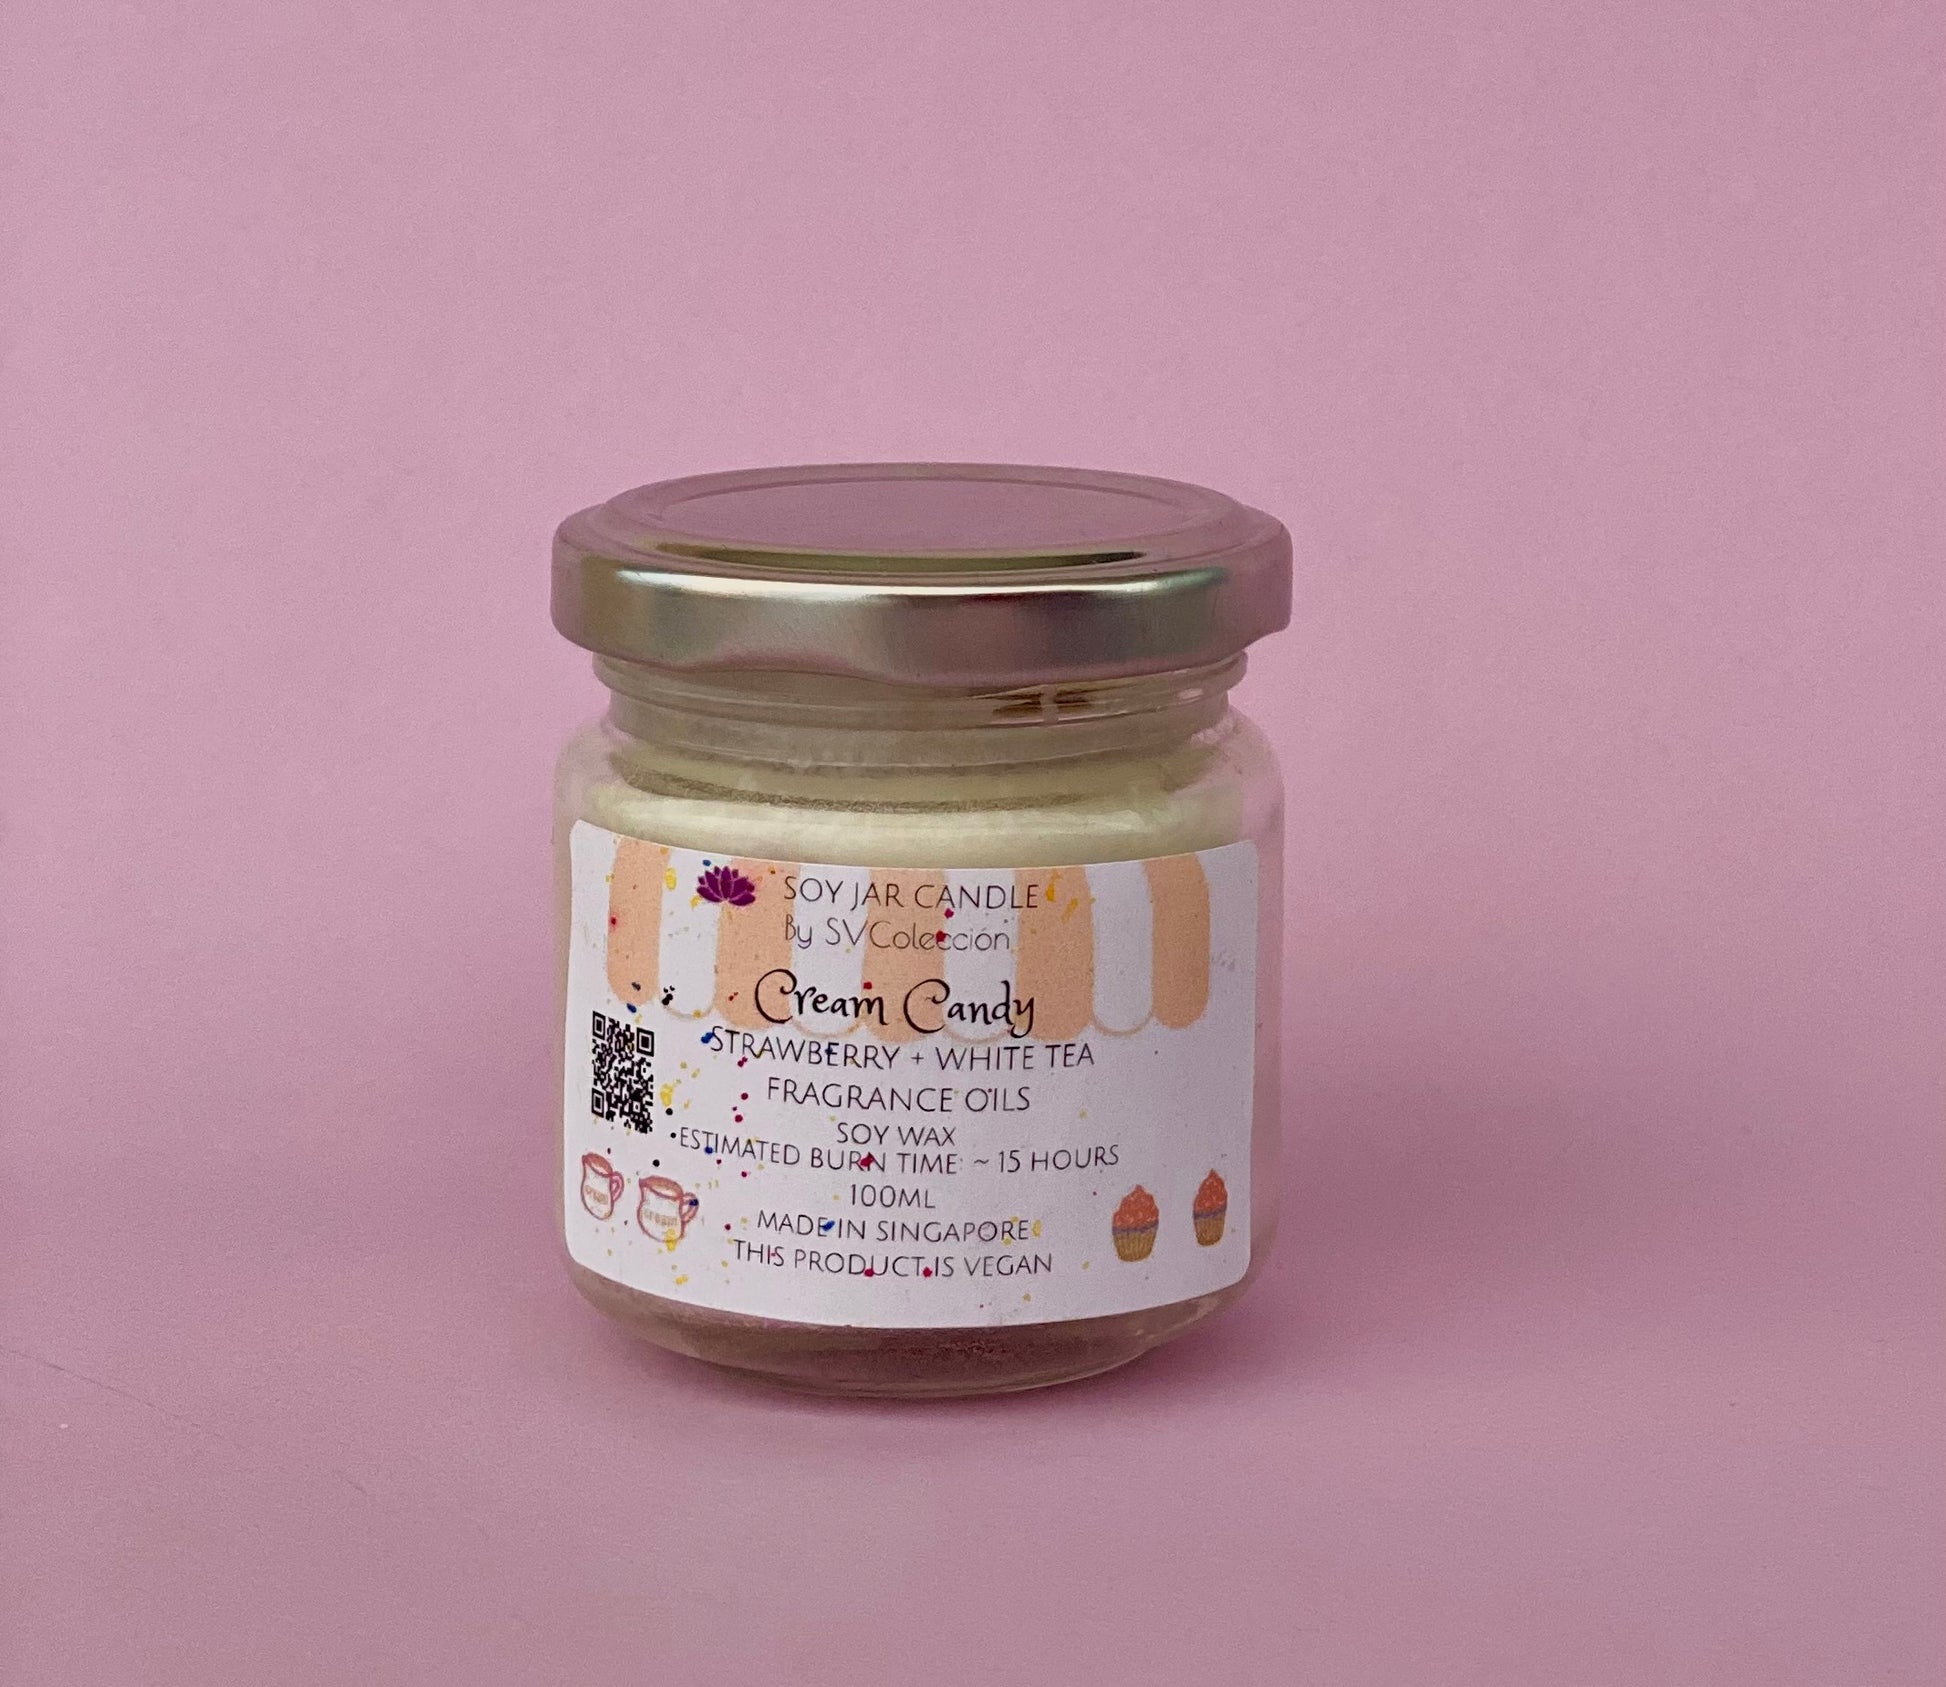 Cream candy soy jar candle by svcoleccion. Available in 100ml and 240ml